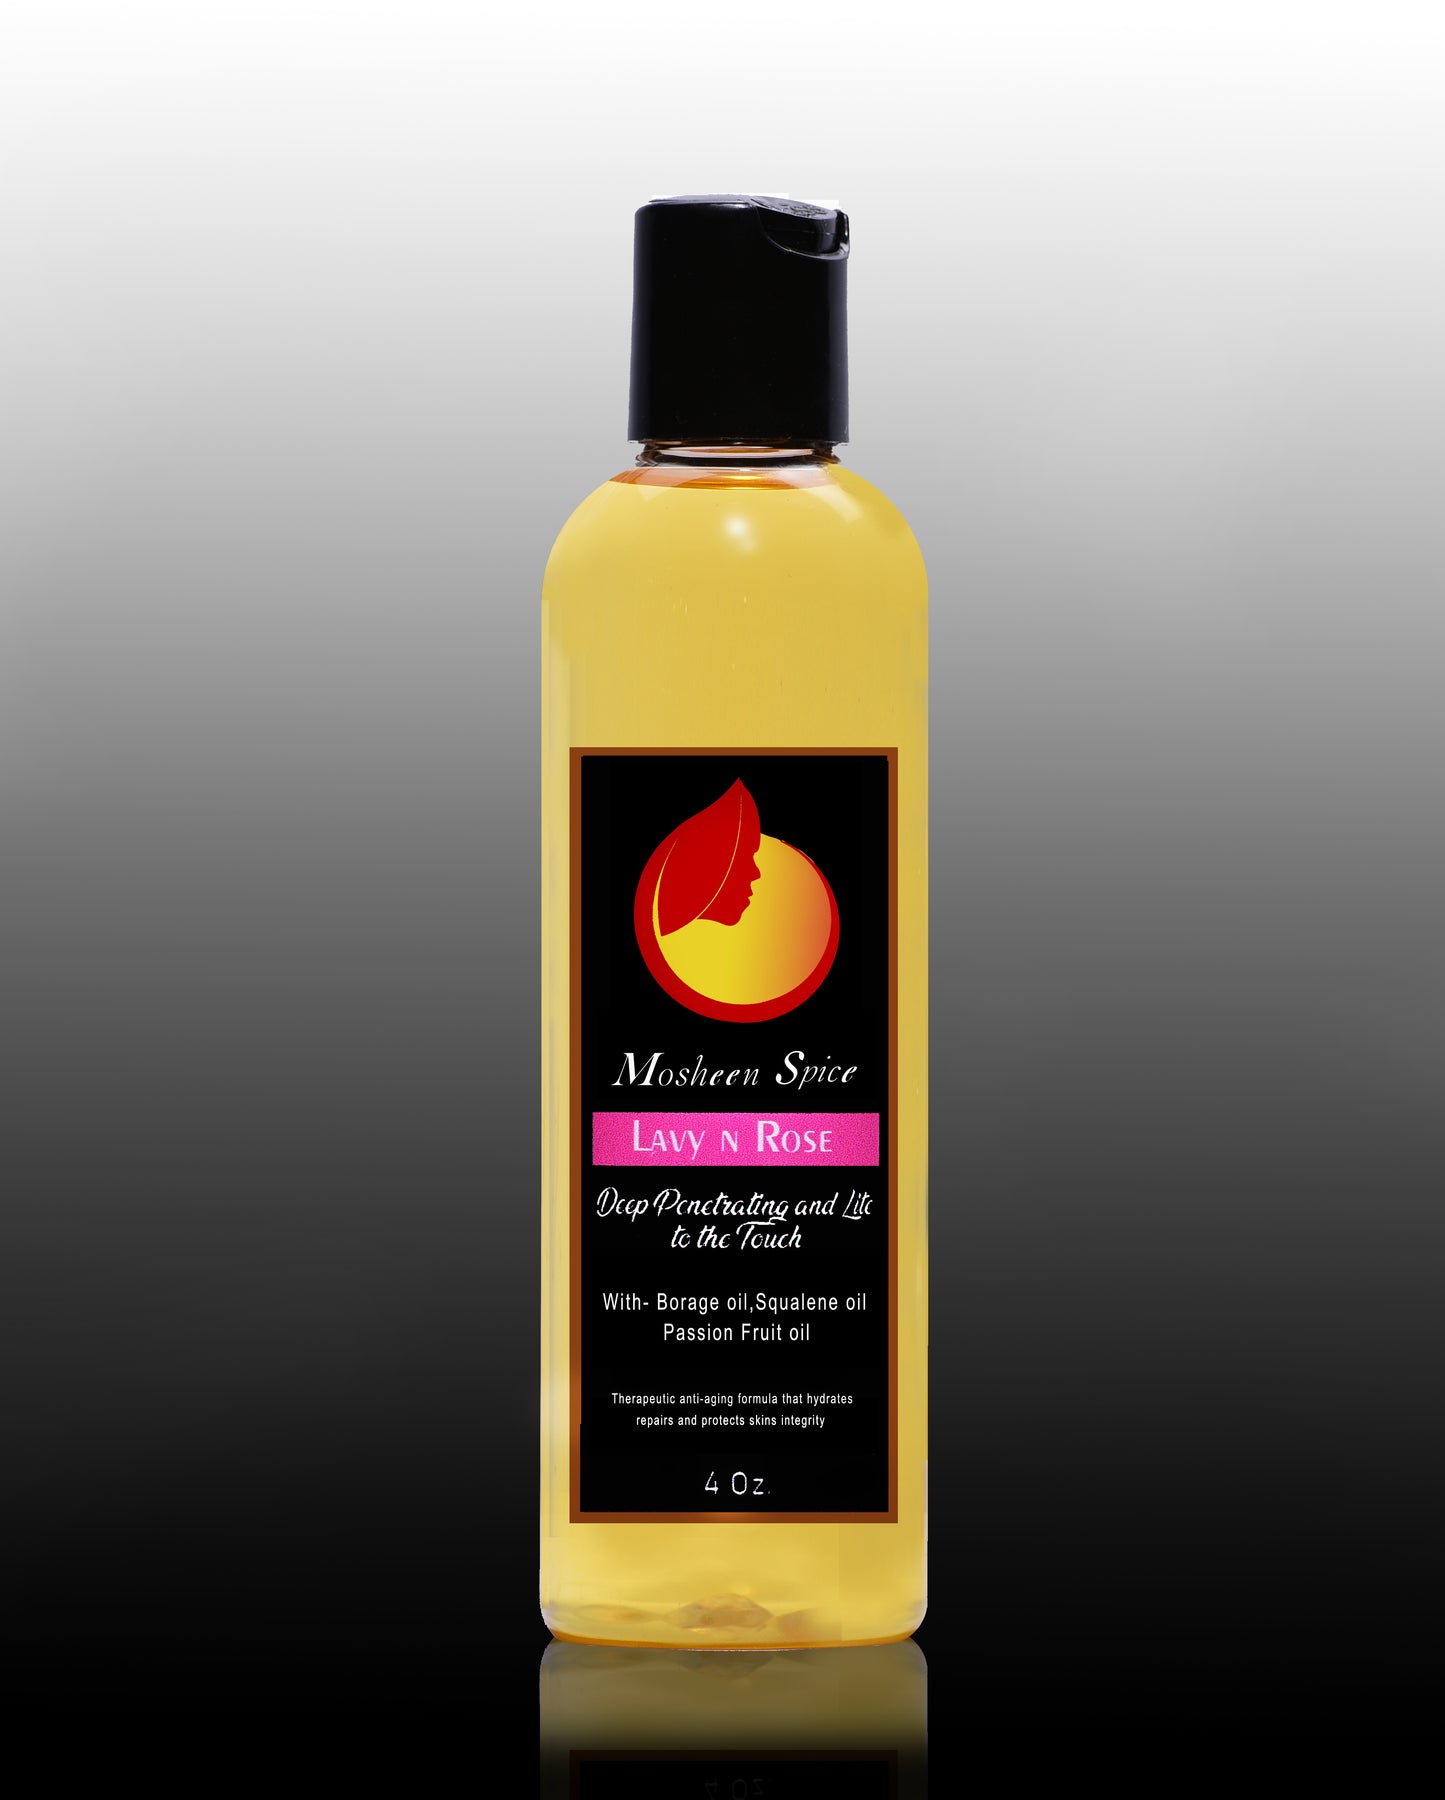 Lavy N Rose Massage and Body Oil